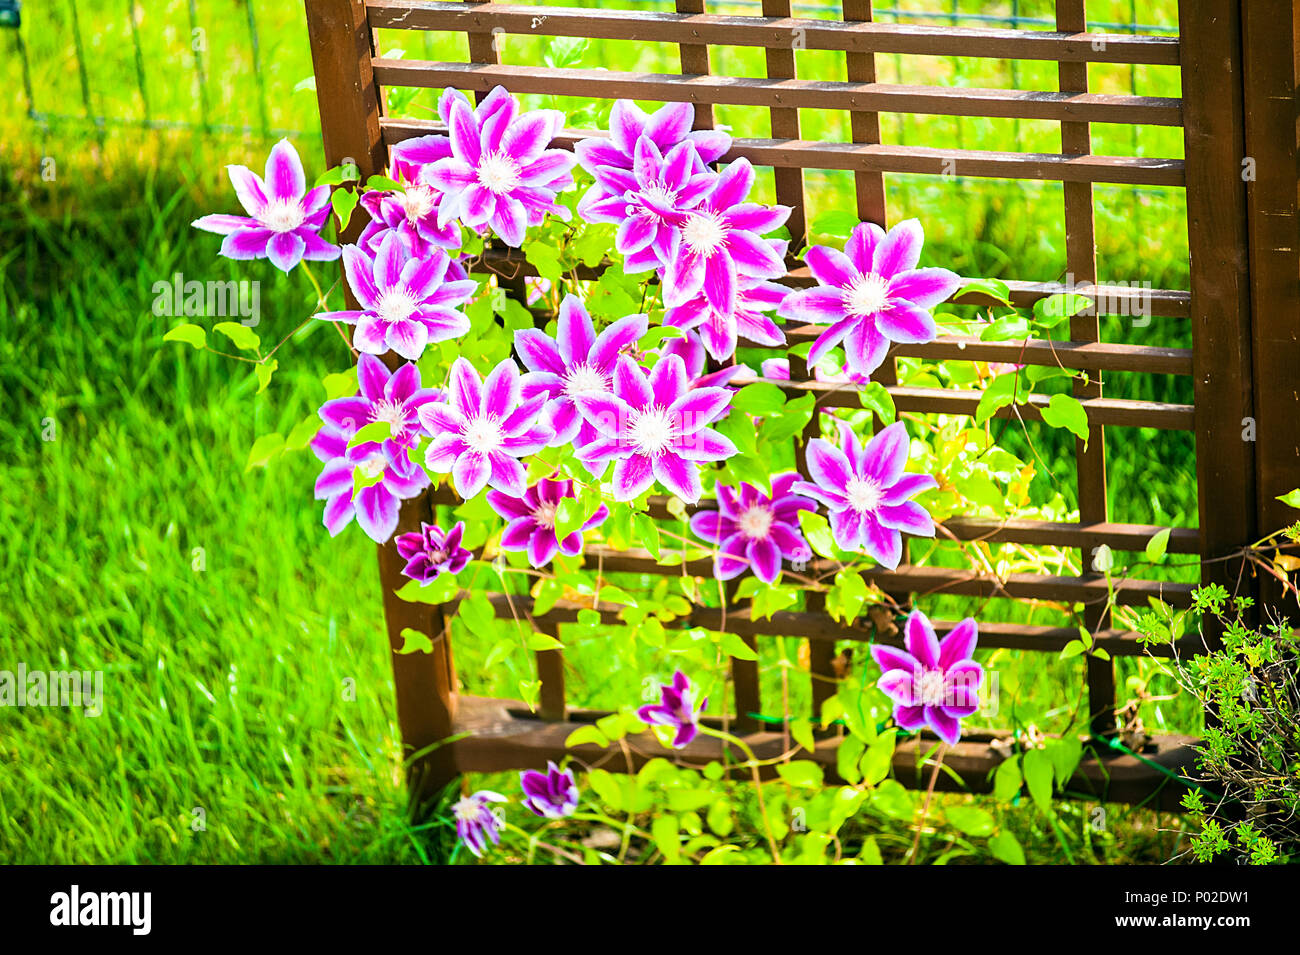 Purple clematis flowers with a wooden garden element in the background. Stock Photo